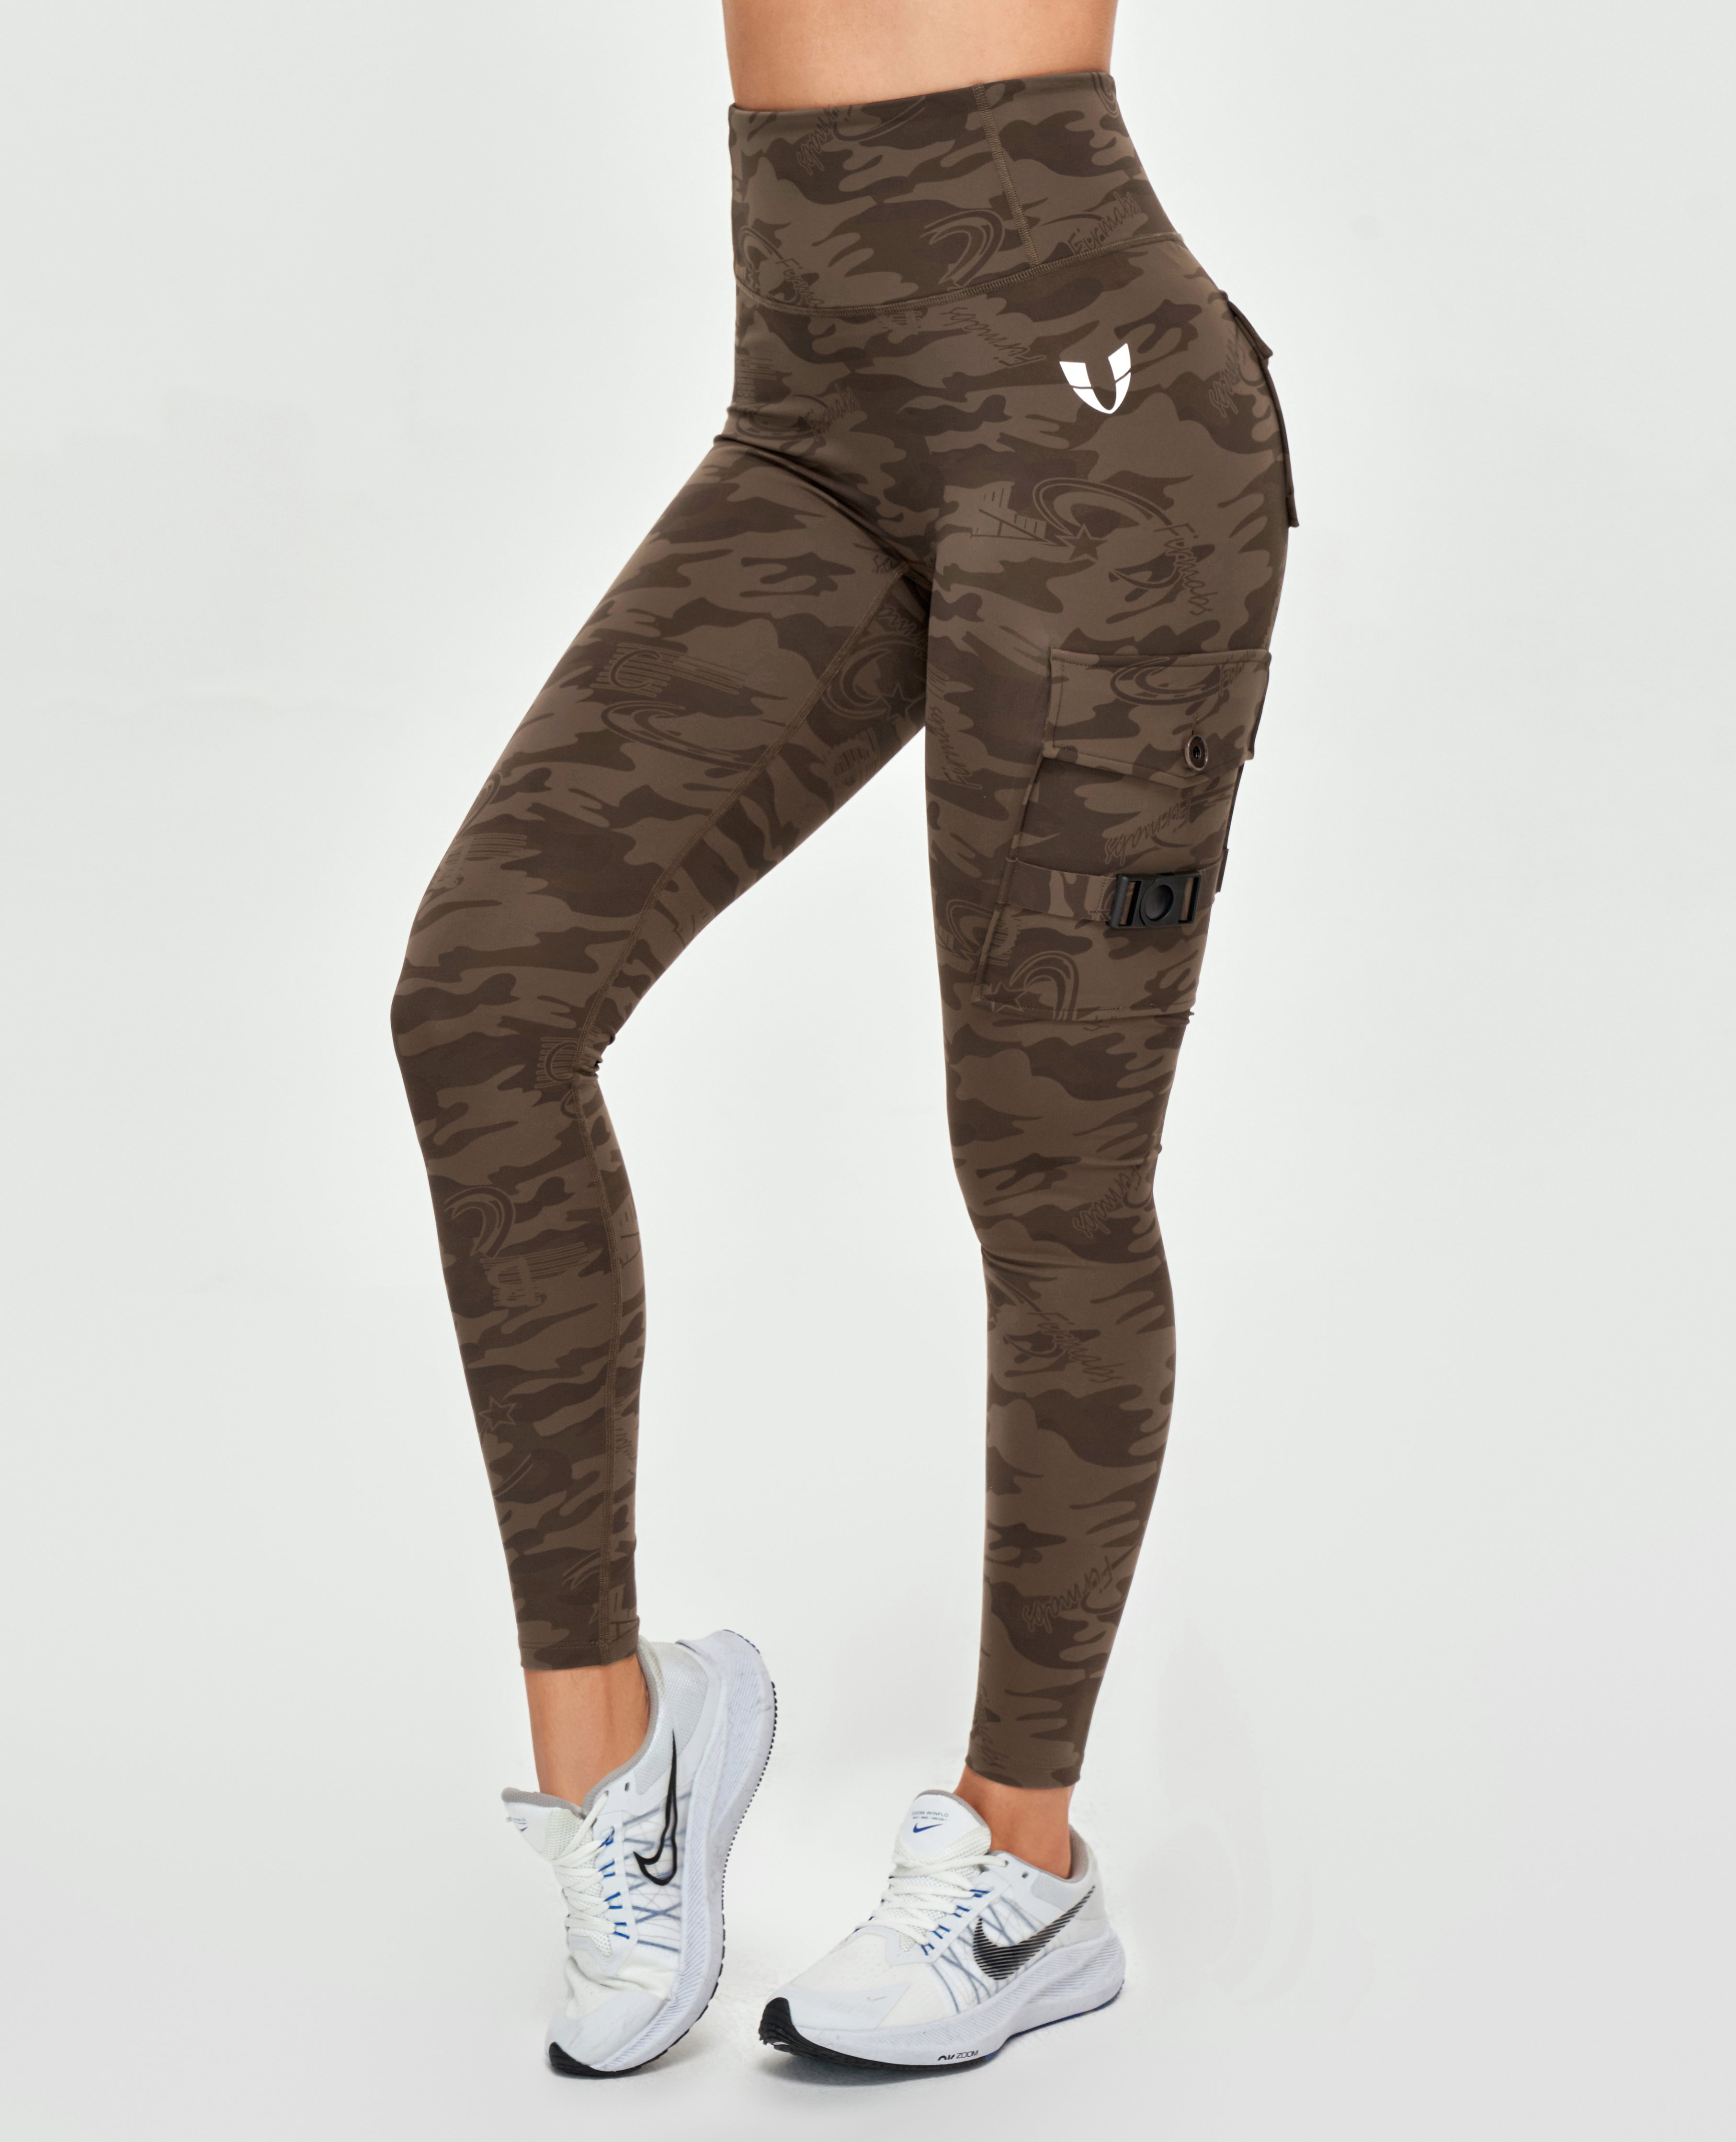 Camo Printed Leggings Women Sports Apparel Fitness Military Activewear  Shaping Sportswear Camouflage Green Brown Gym Gear Yoga Pants Tight 